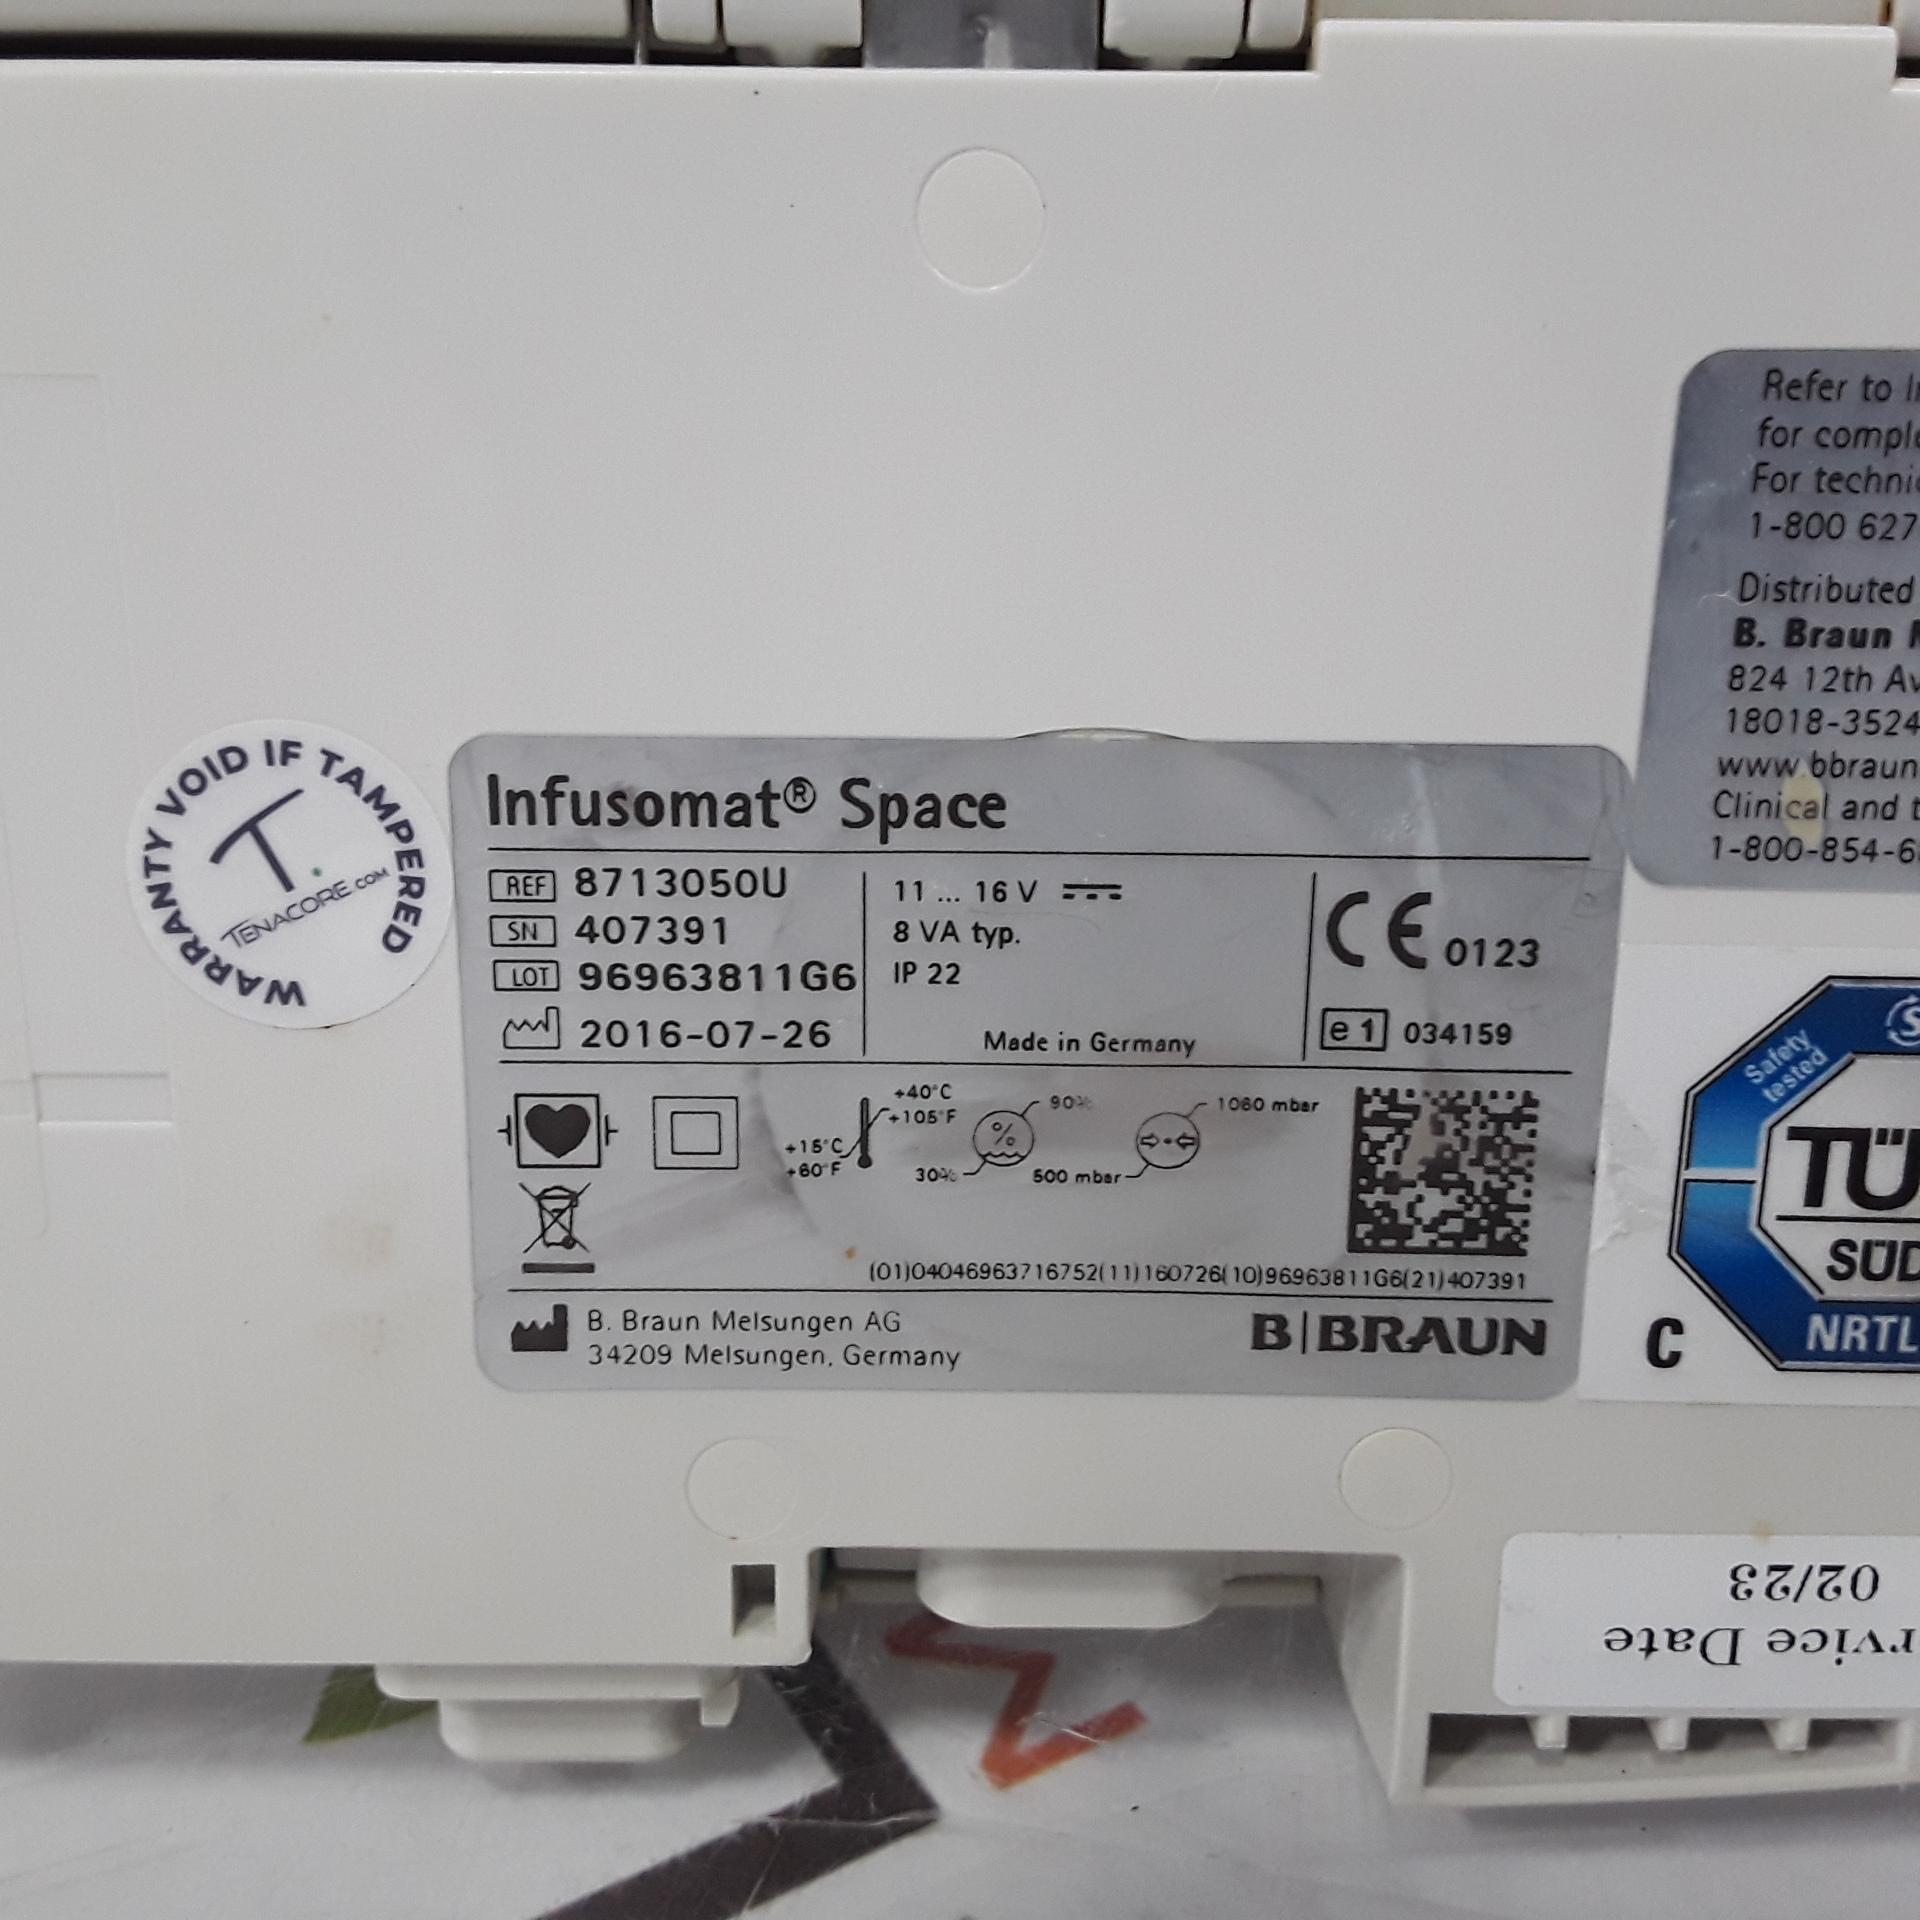 B. Braun Infusomat Space w/Pole Clamp Infusion Pump - 312219